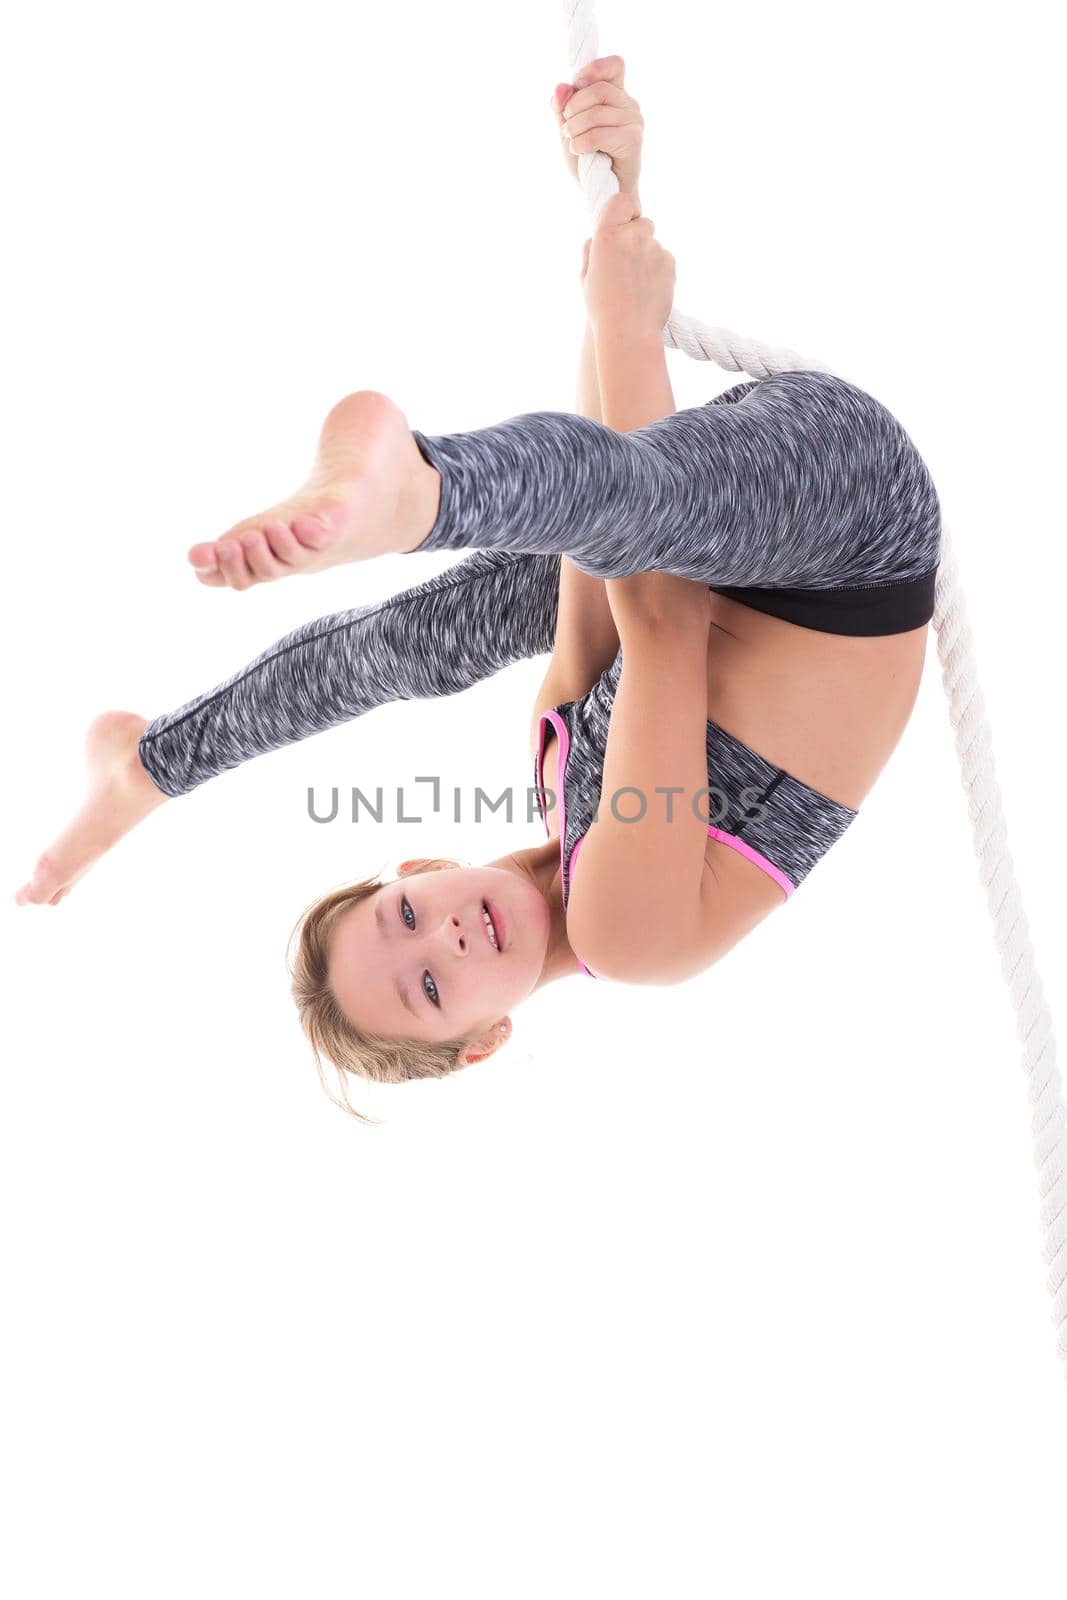 Girl flipping upside down on rope. Smiling child wearing sports clothes exercising on rope against white background. Happy childhood, active lifestyle concept